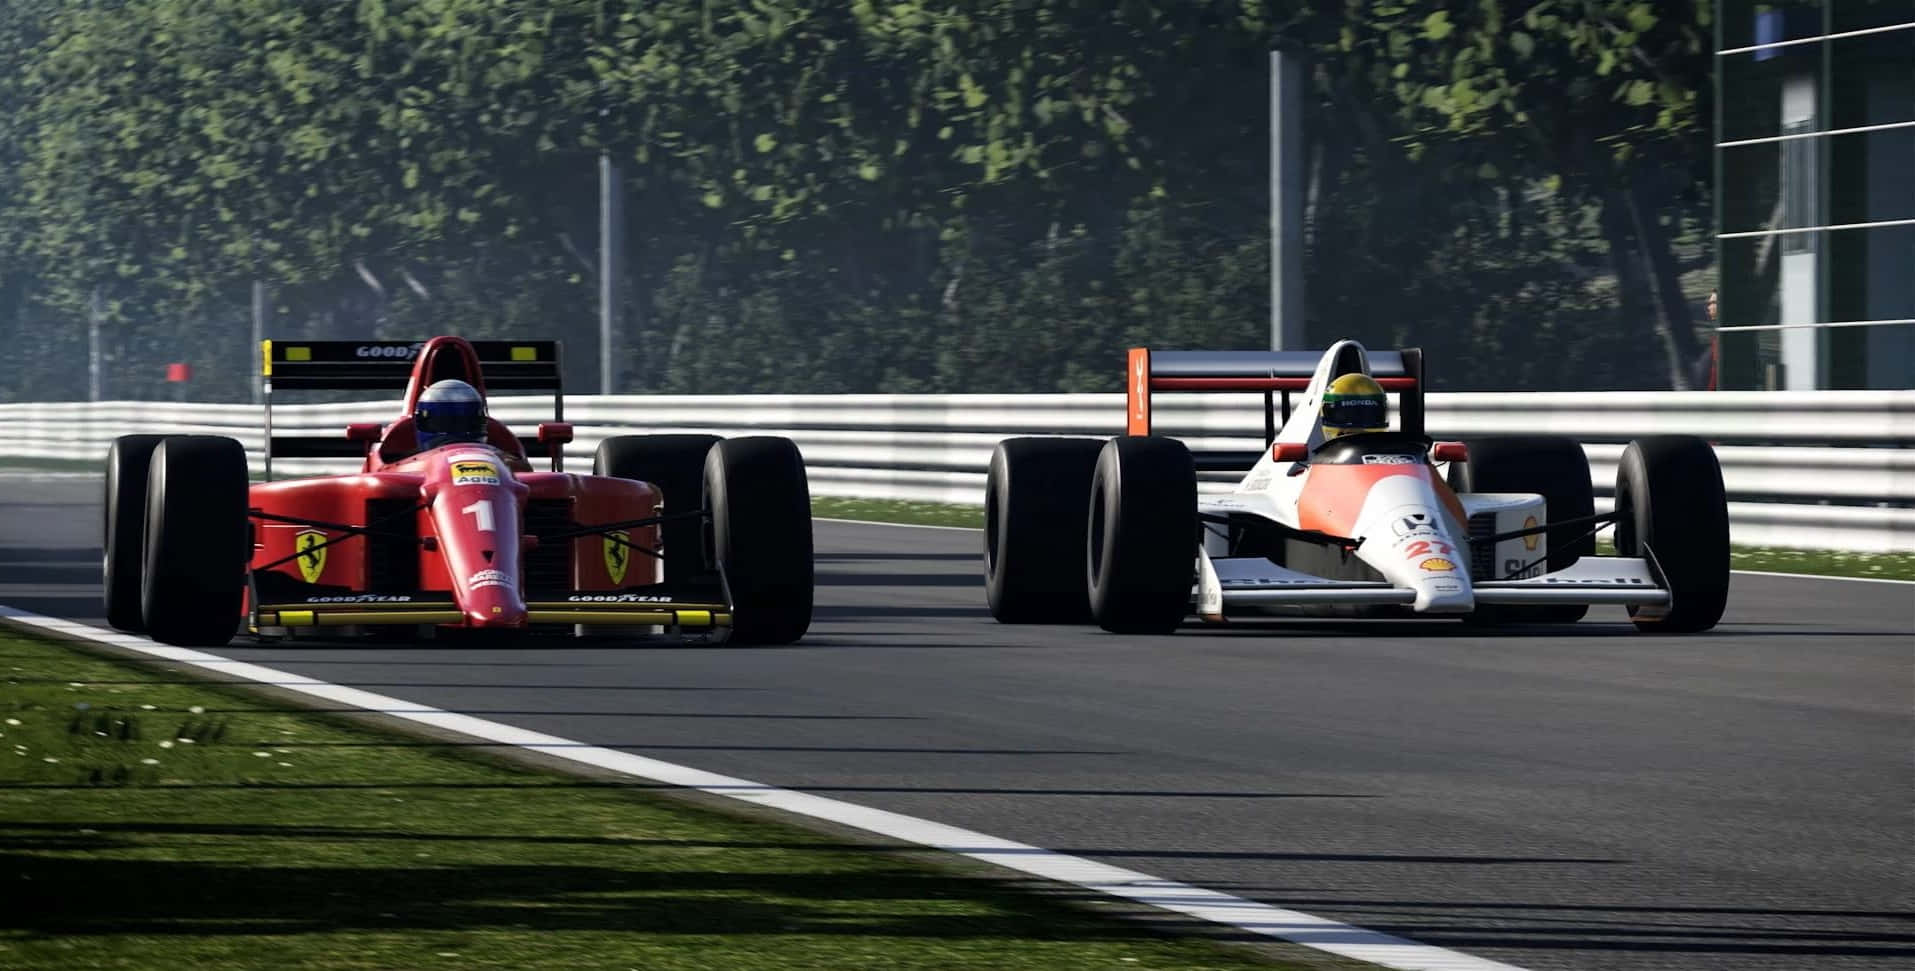 Enjoy the Thrill of Formula 1 Racing on this Epic F1 Game Wallpaper